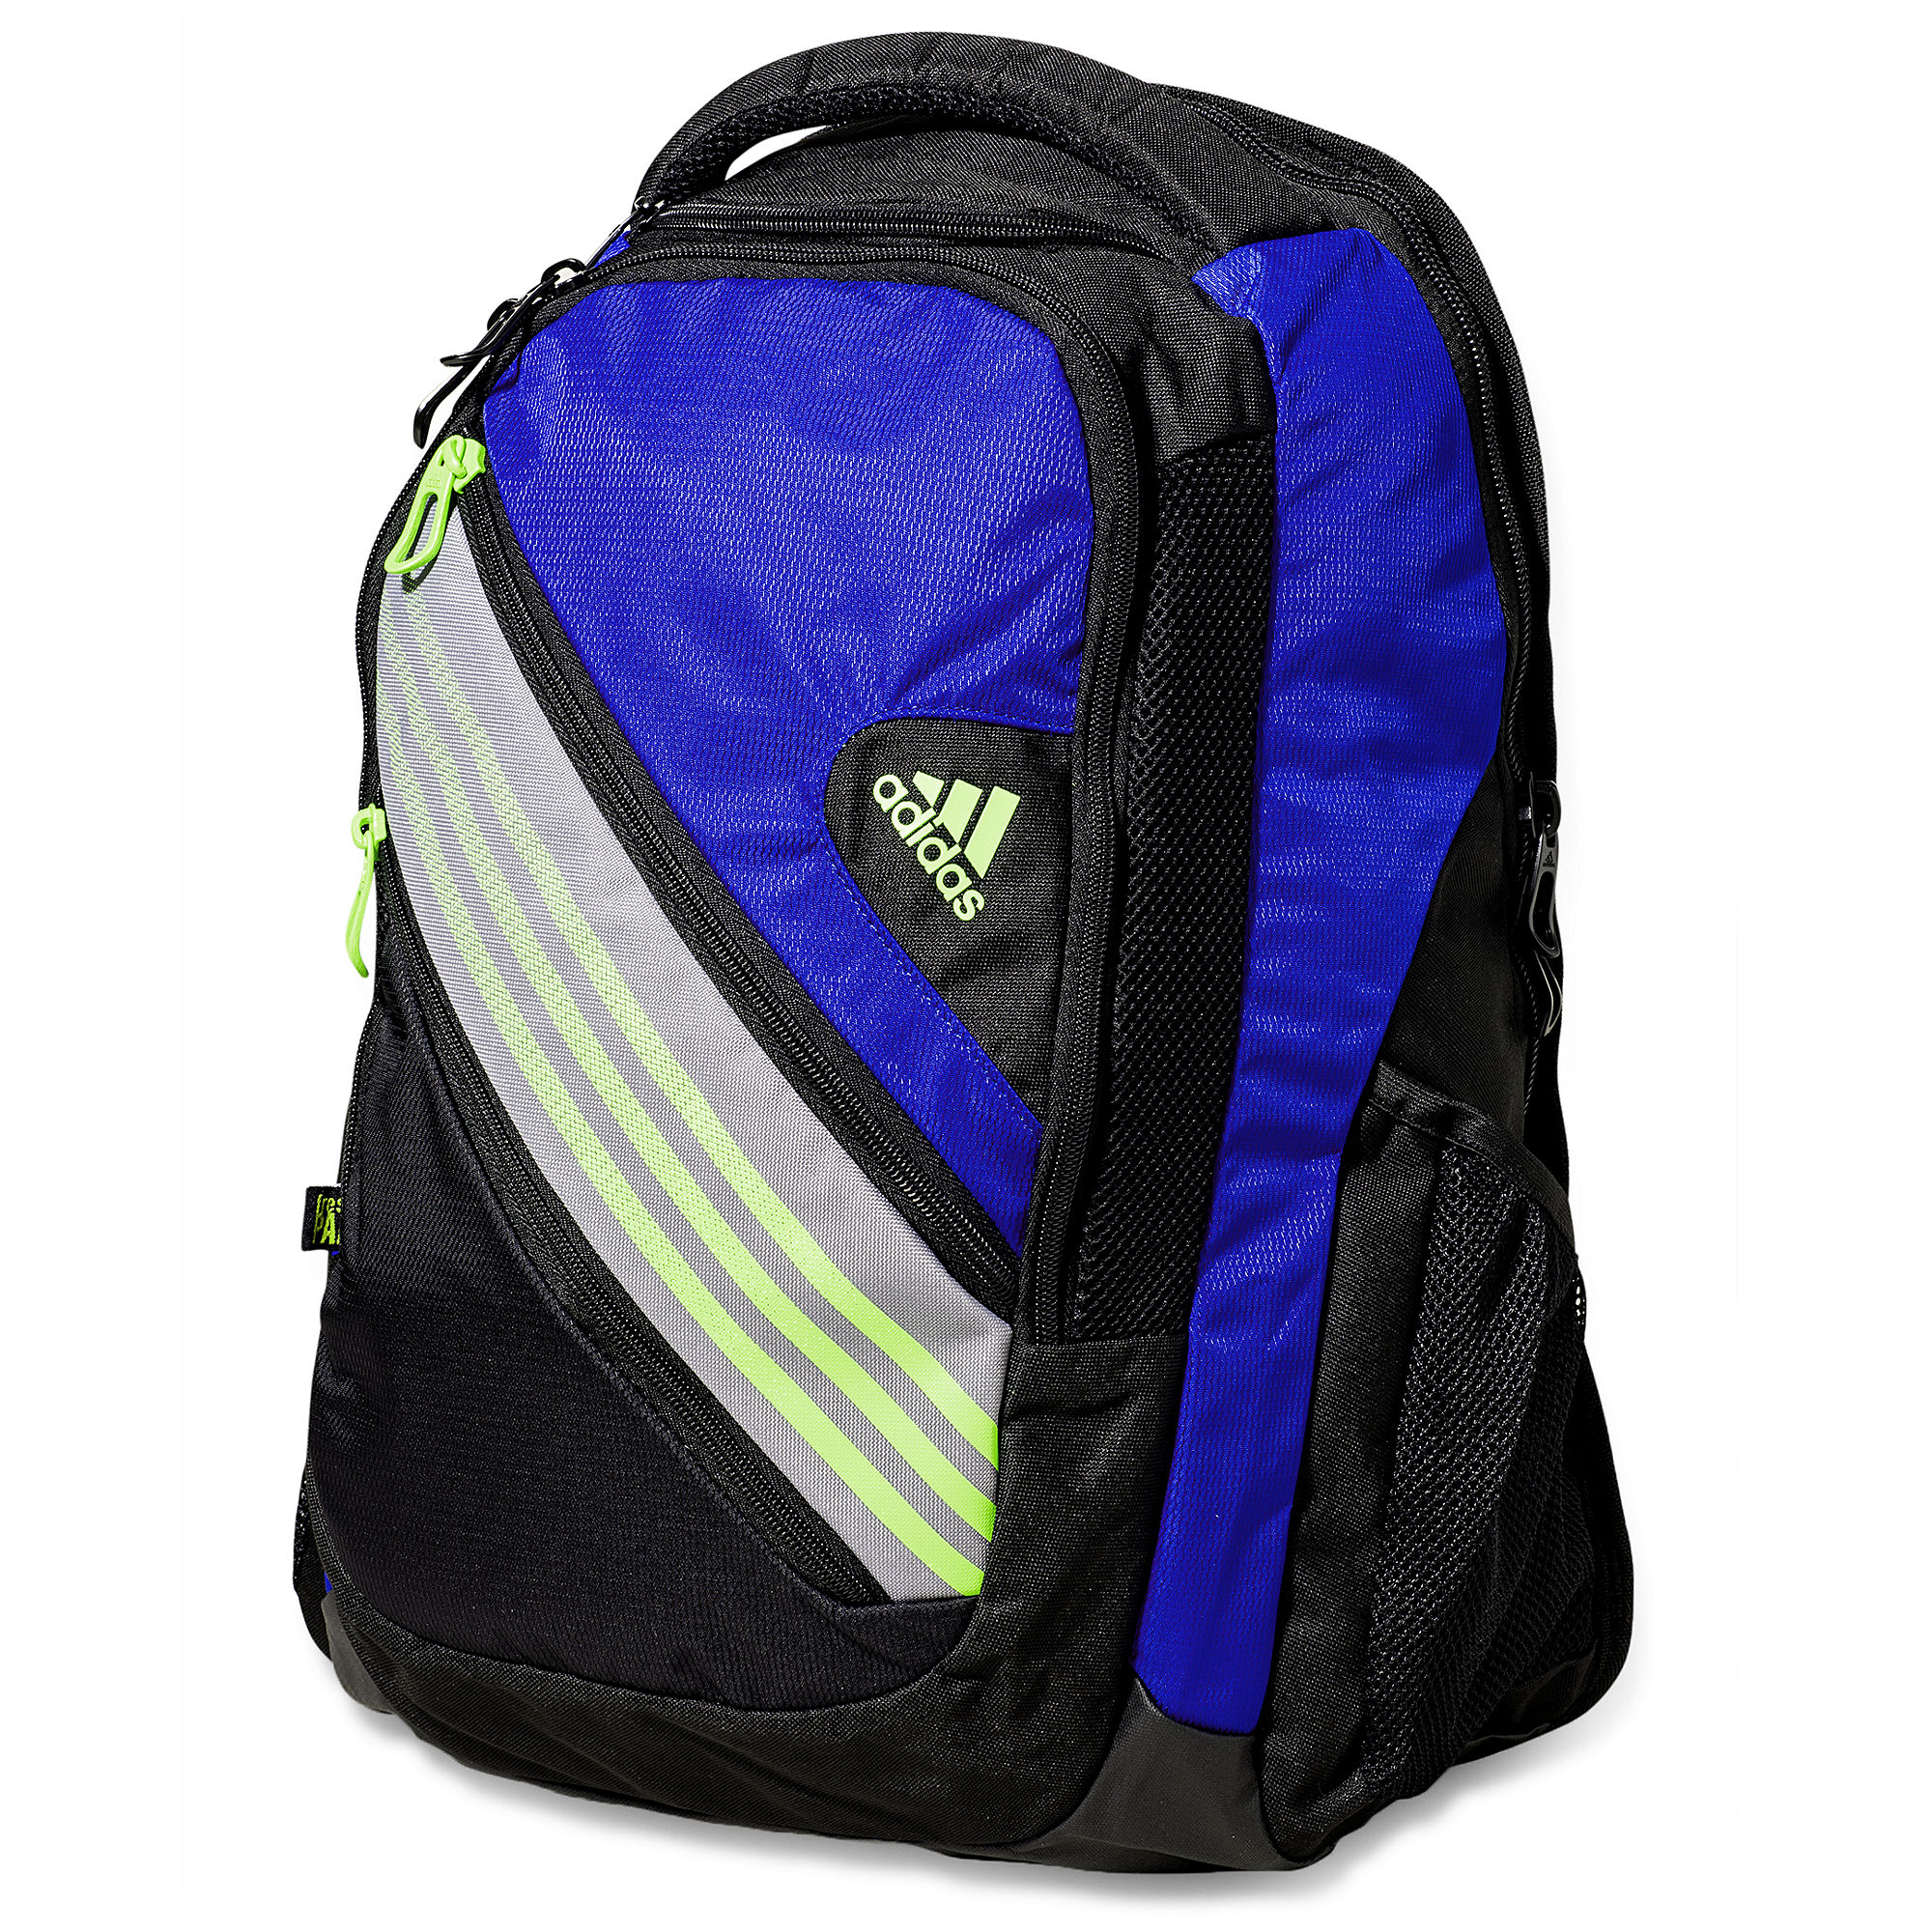 adidas climacool quick backpack